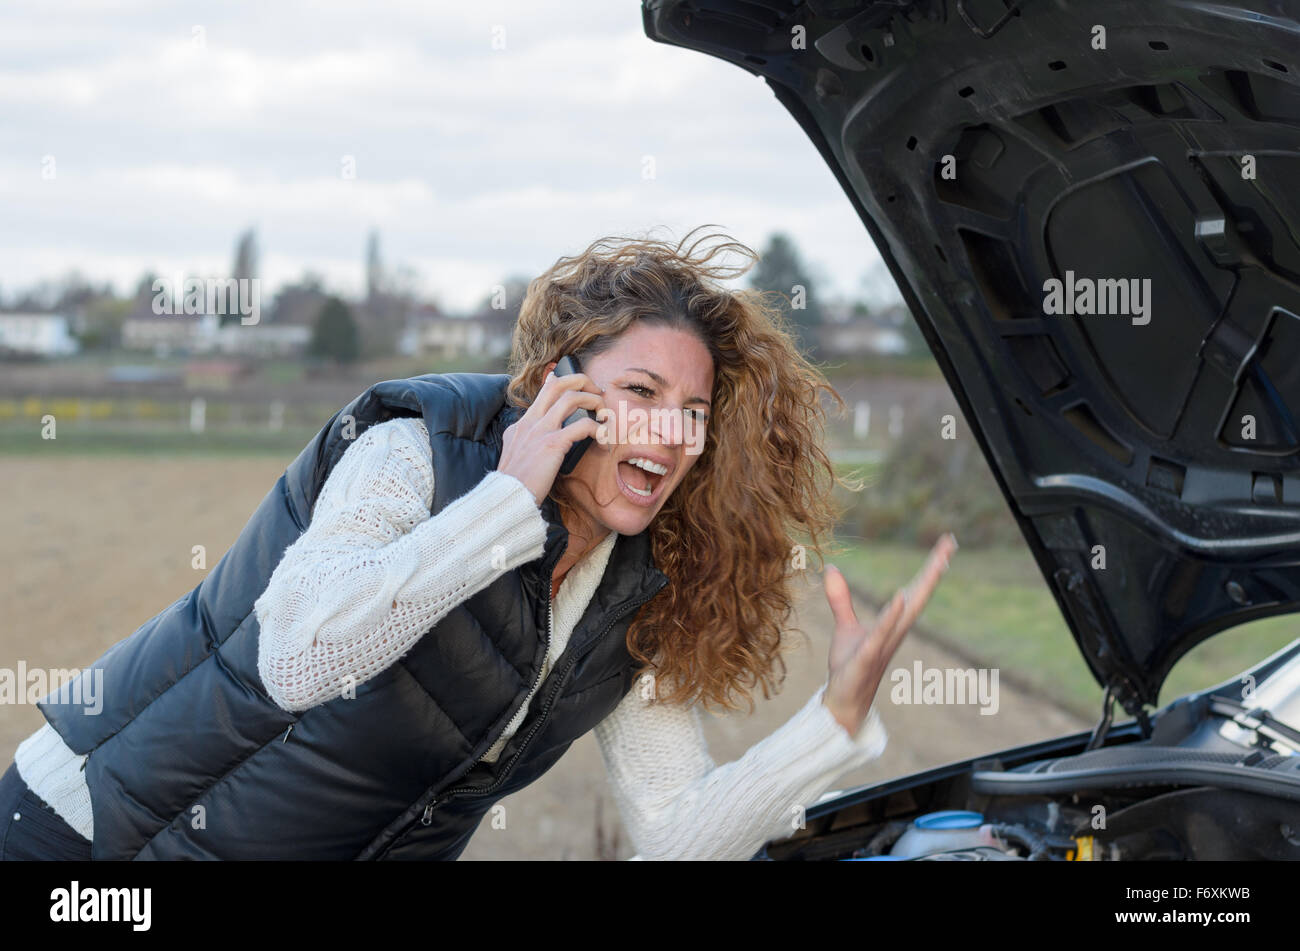 woman 's car breaks down and she is calling the emergency services Stock Photo